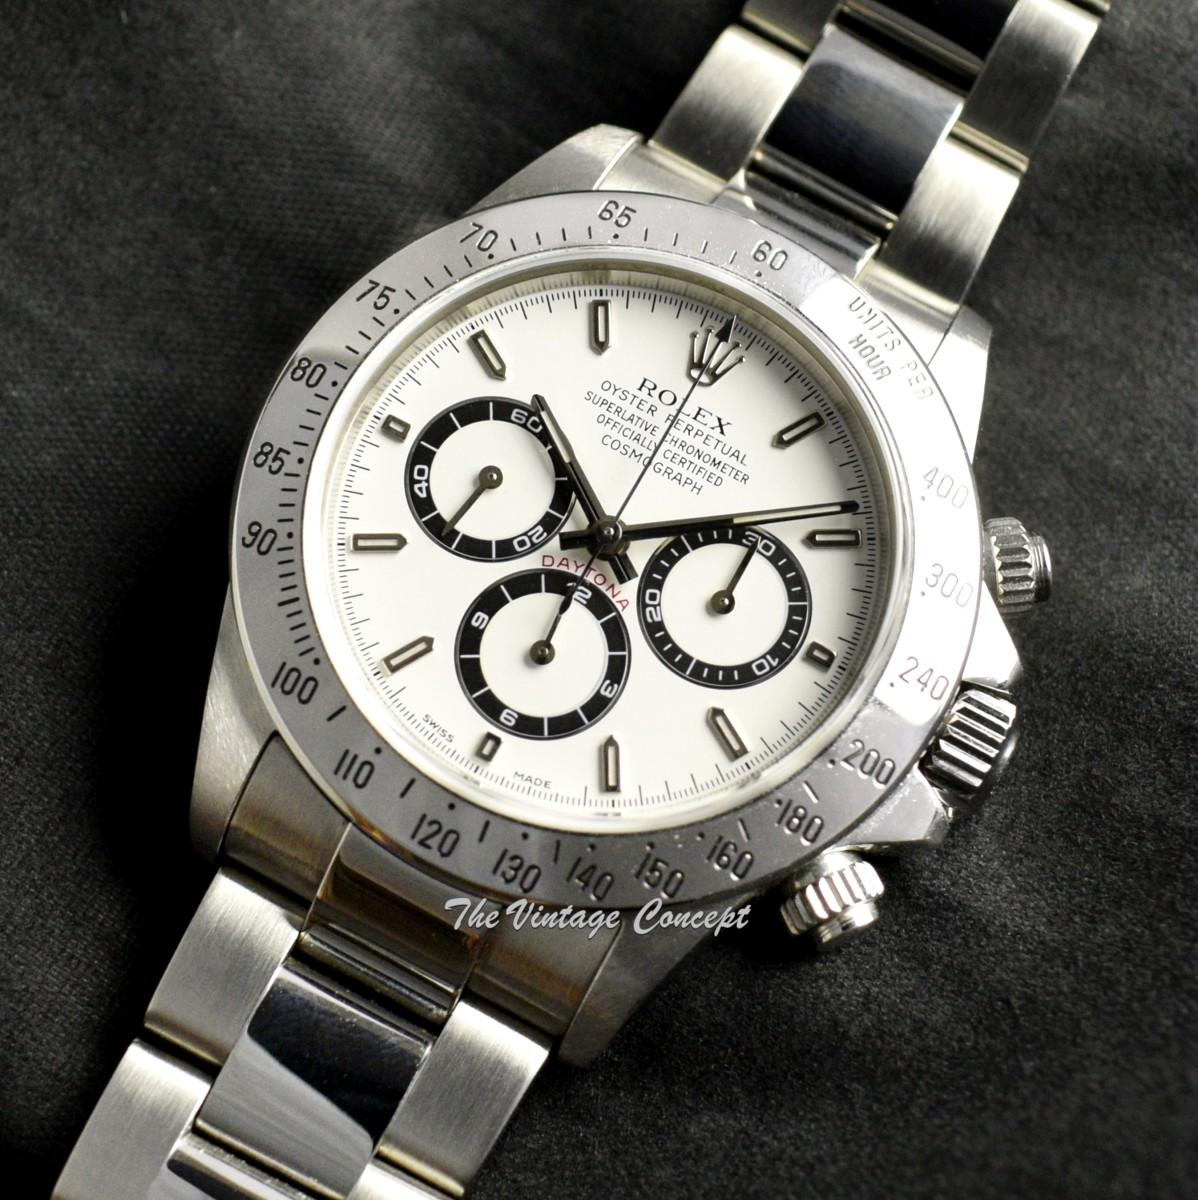 Rolex Steel Daytona Cosmograph “A Series” White Dial 16520 (Full Set)  (SOLD)